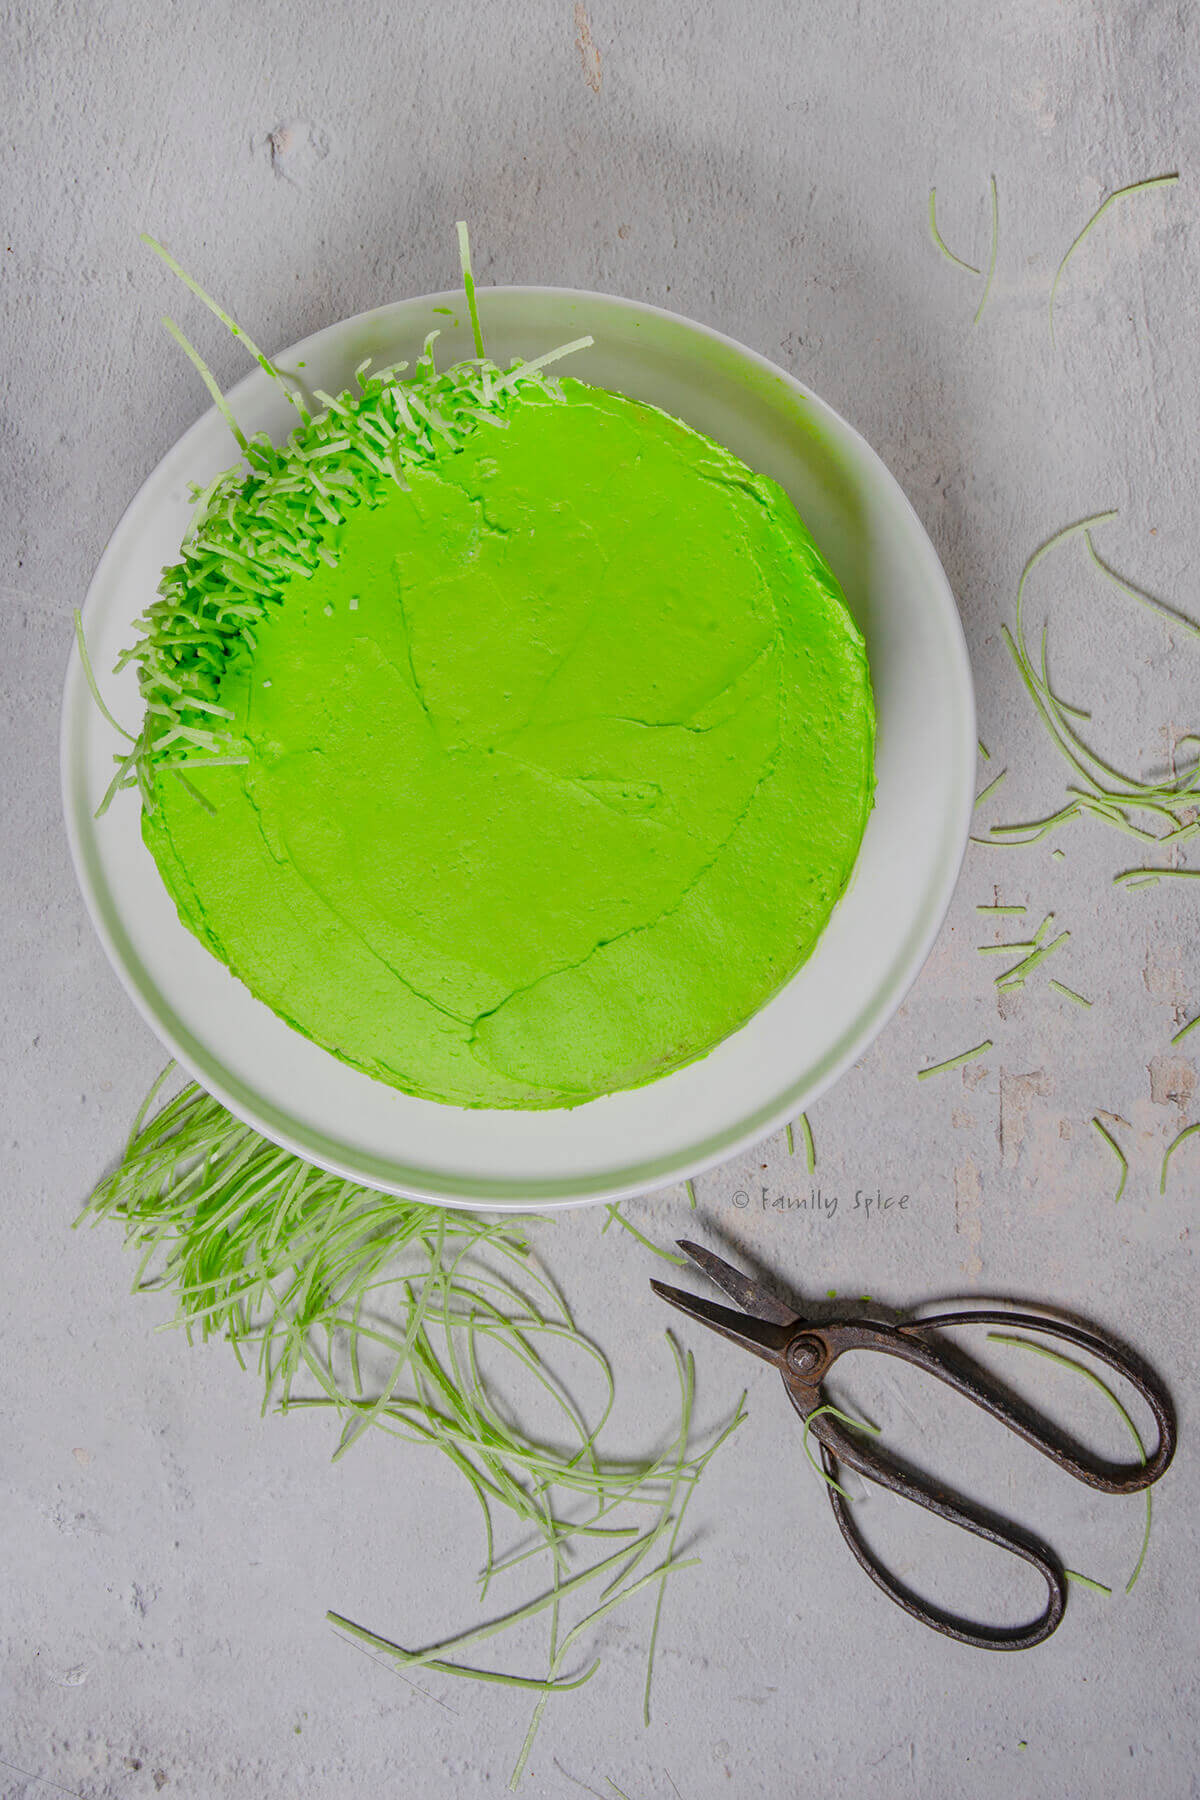 Top view of adding edible candy grass to a green frosted cake along its sides and on top with scissors next to it